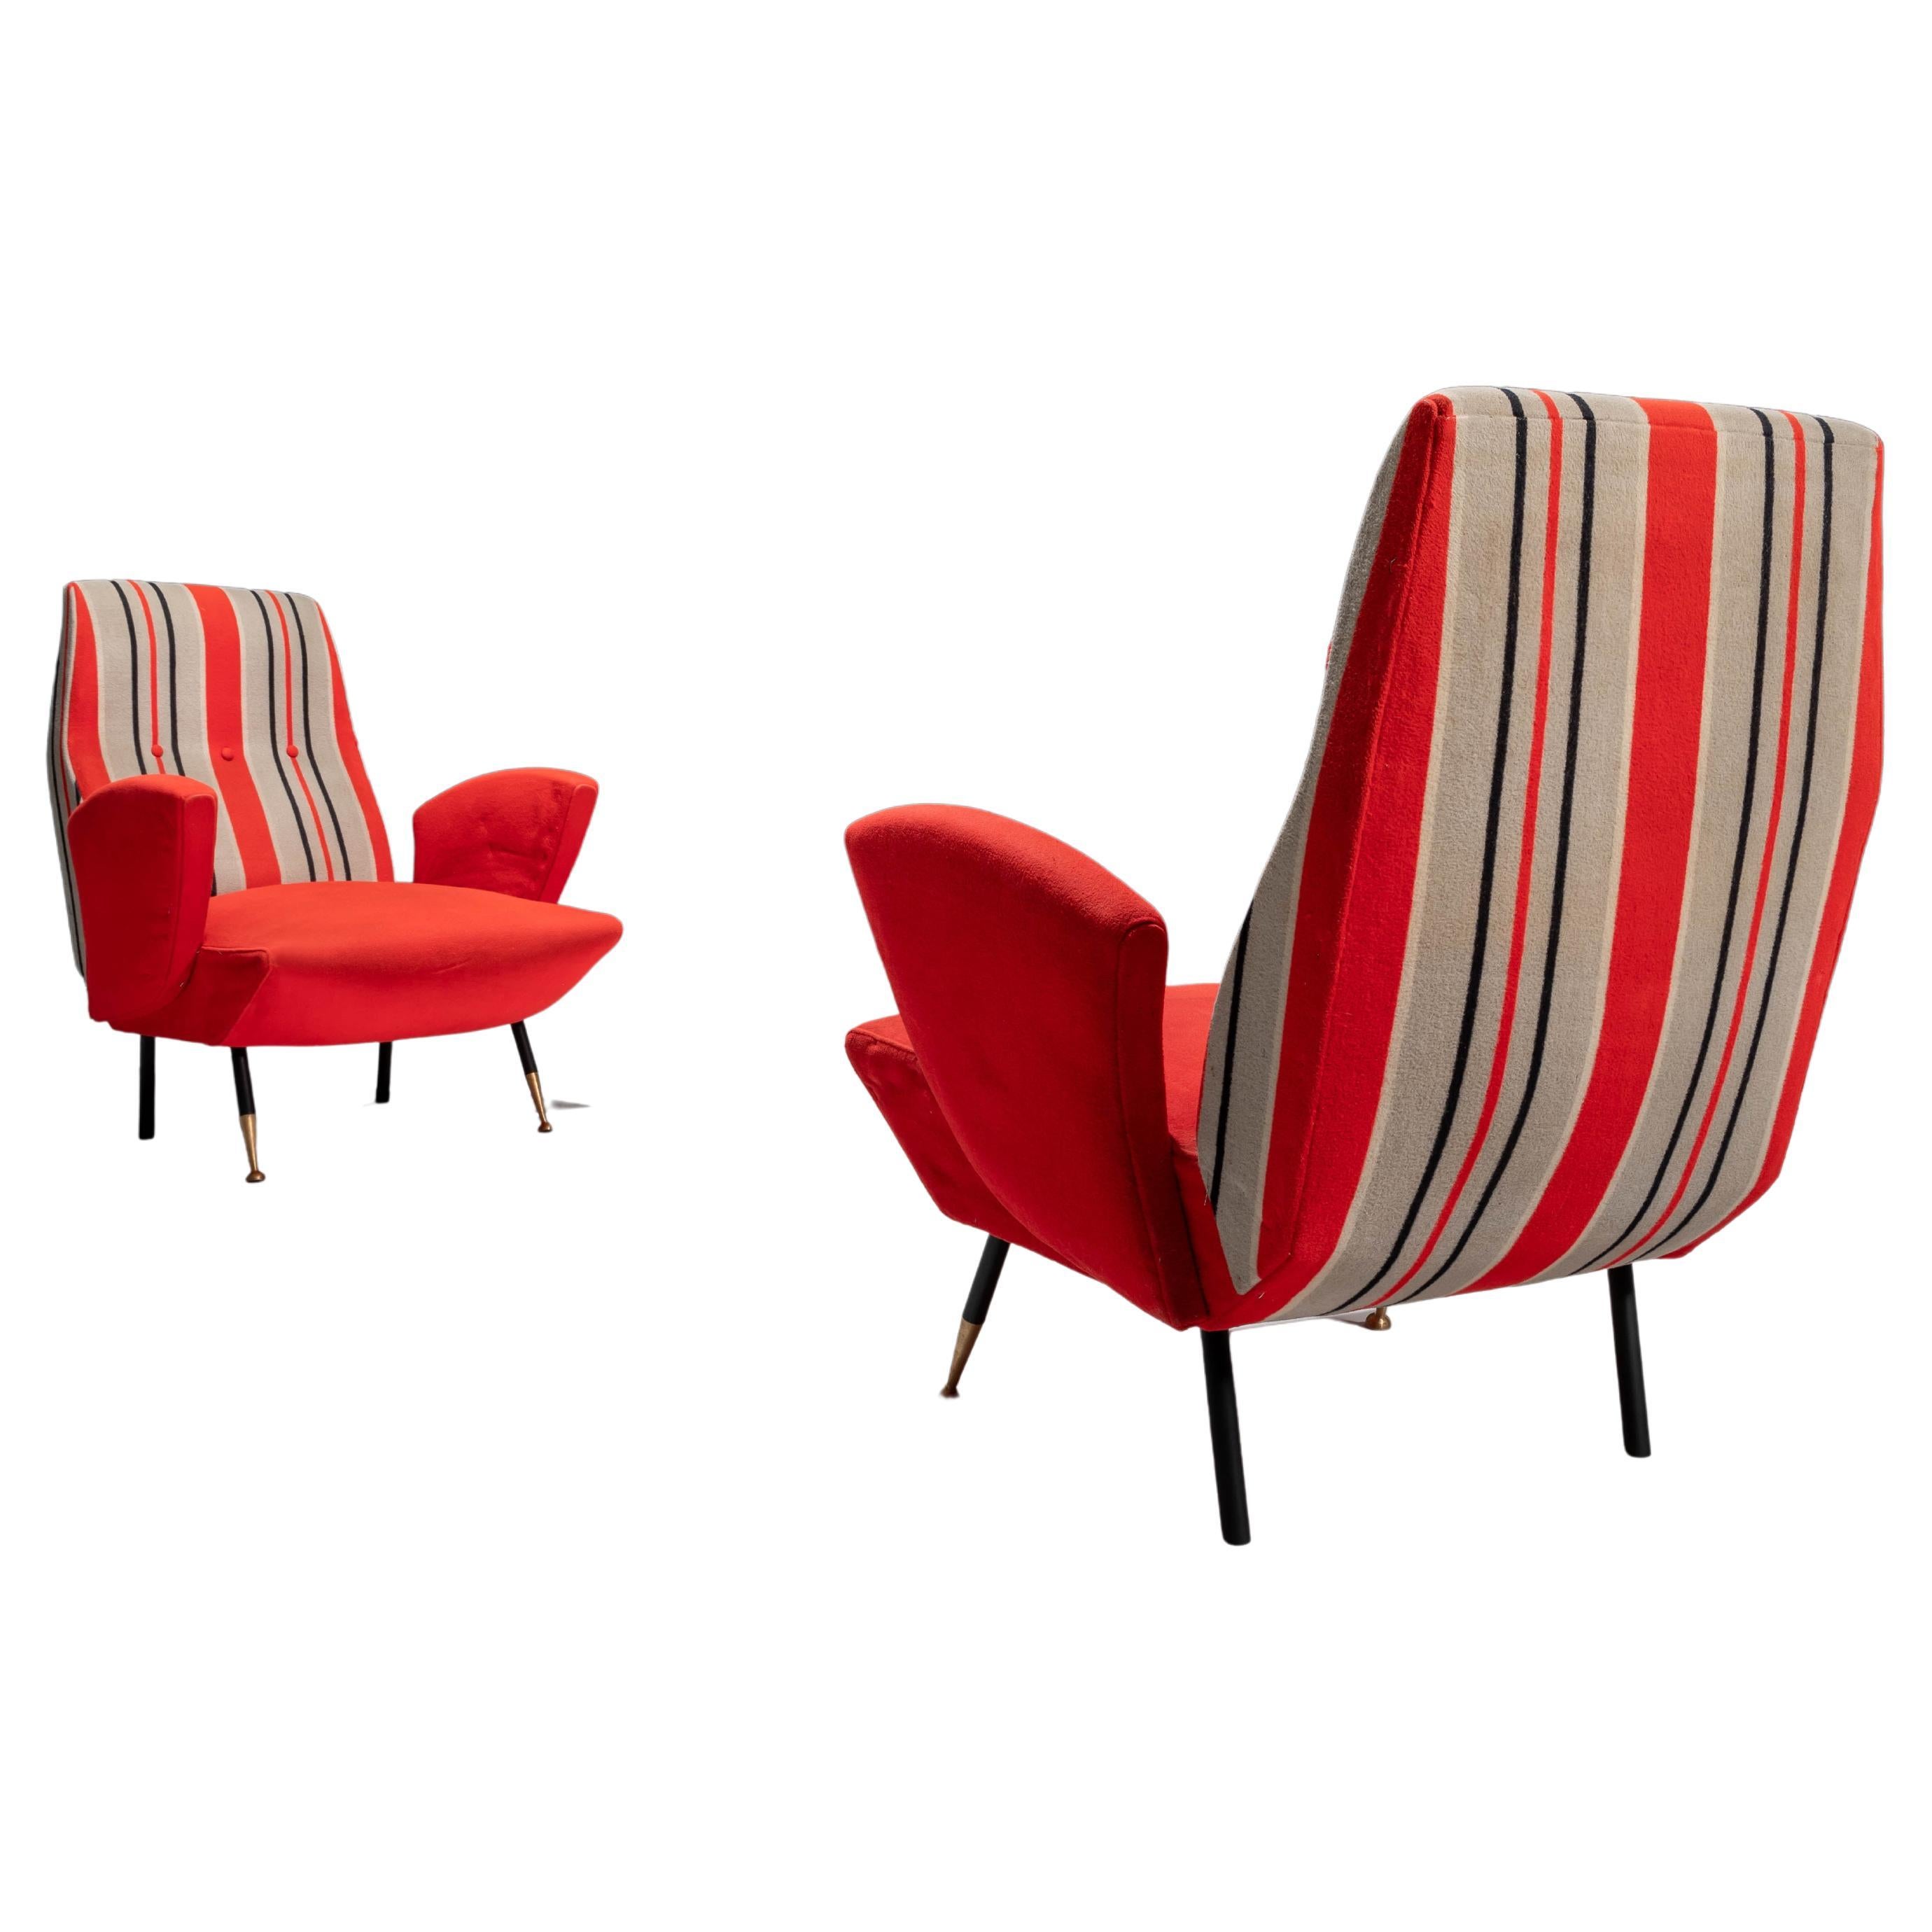 Set of Two Italian Disco Chairs in Original Upholstery, 1960's For Sale